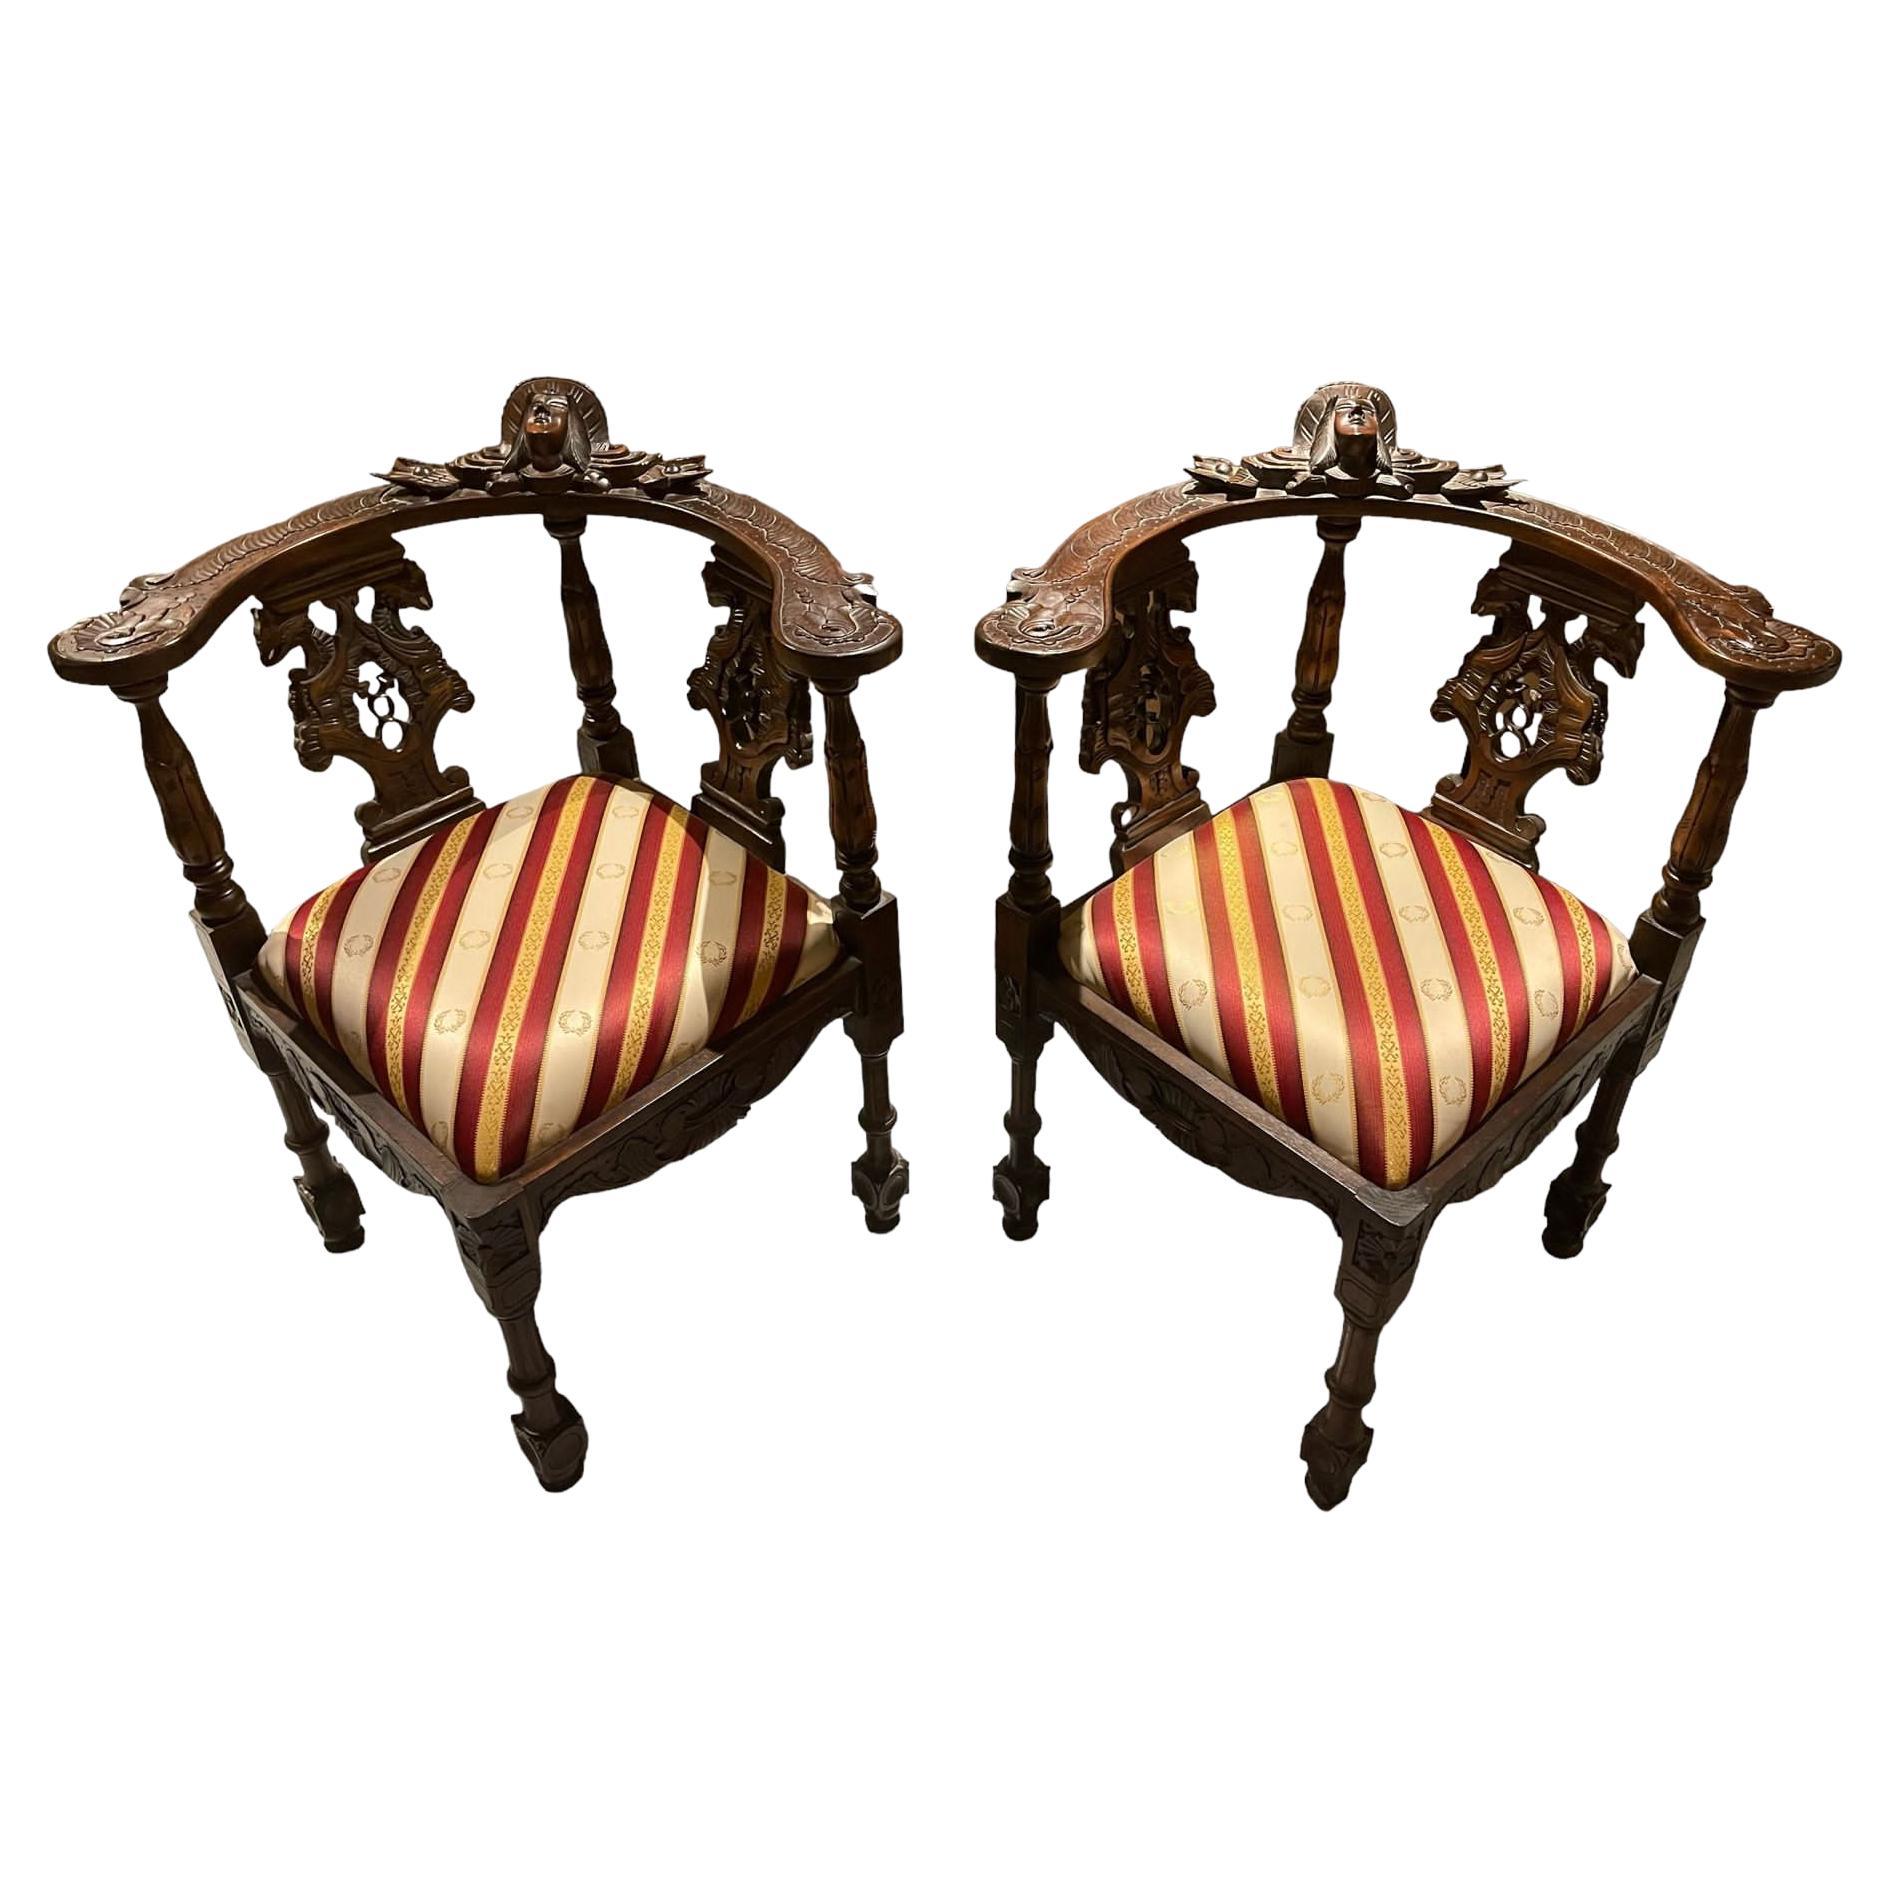 Pair of Mahogany Carved Victorian style corner chairs